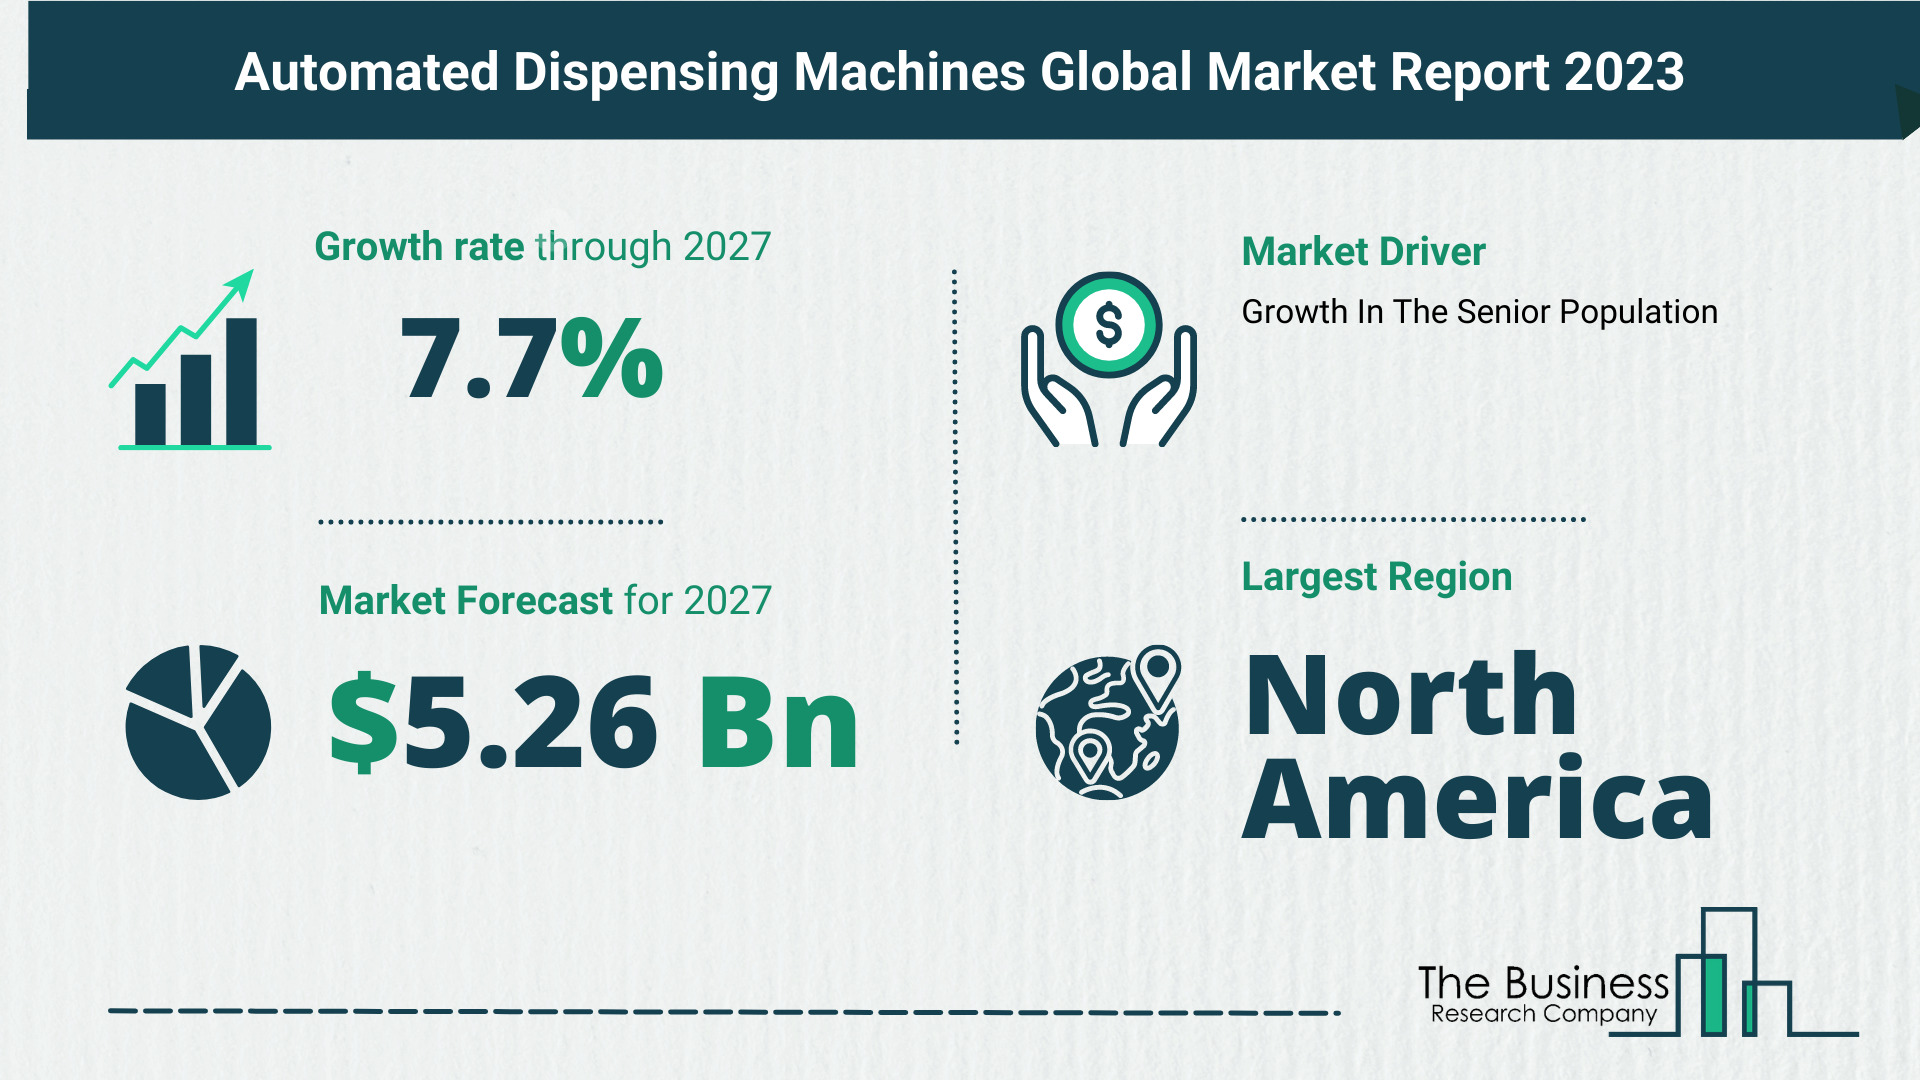 Overview Of The Automated Dispensing Machines Market 2023: Size, Drivers, And Trends